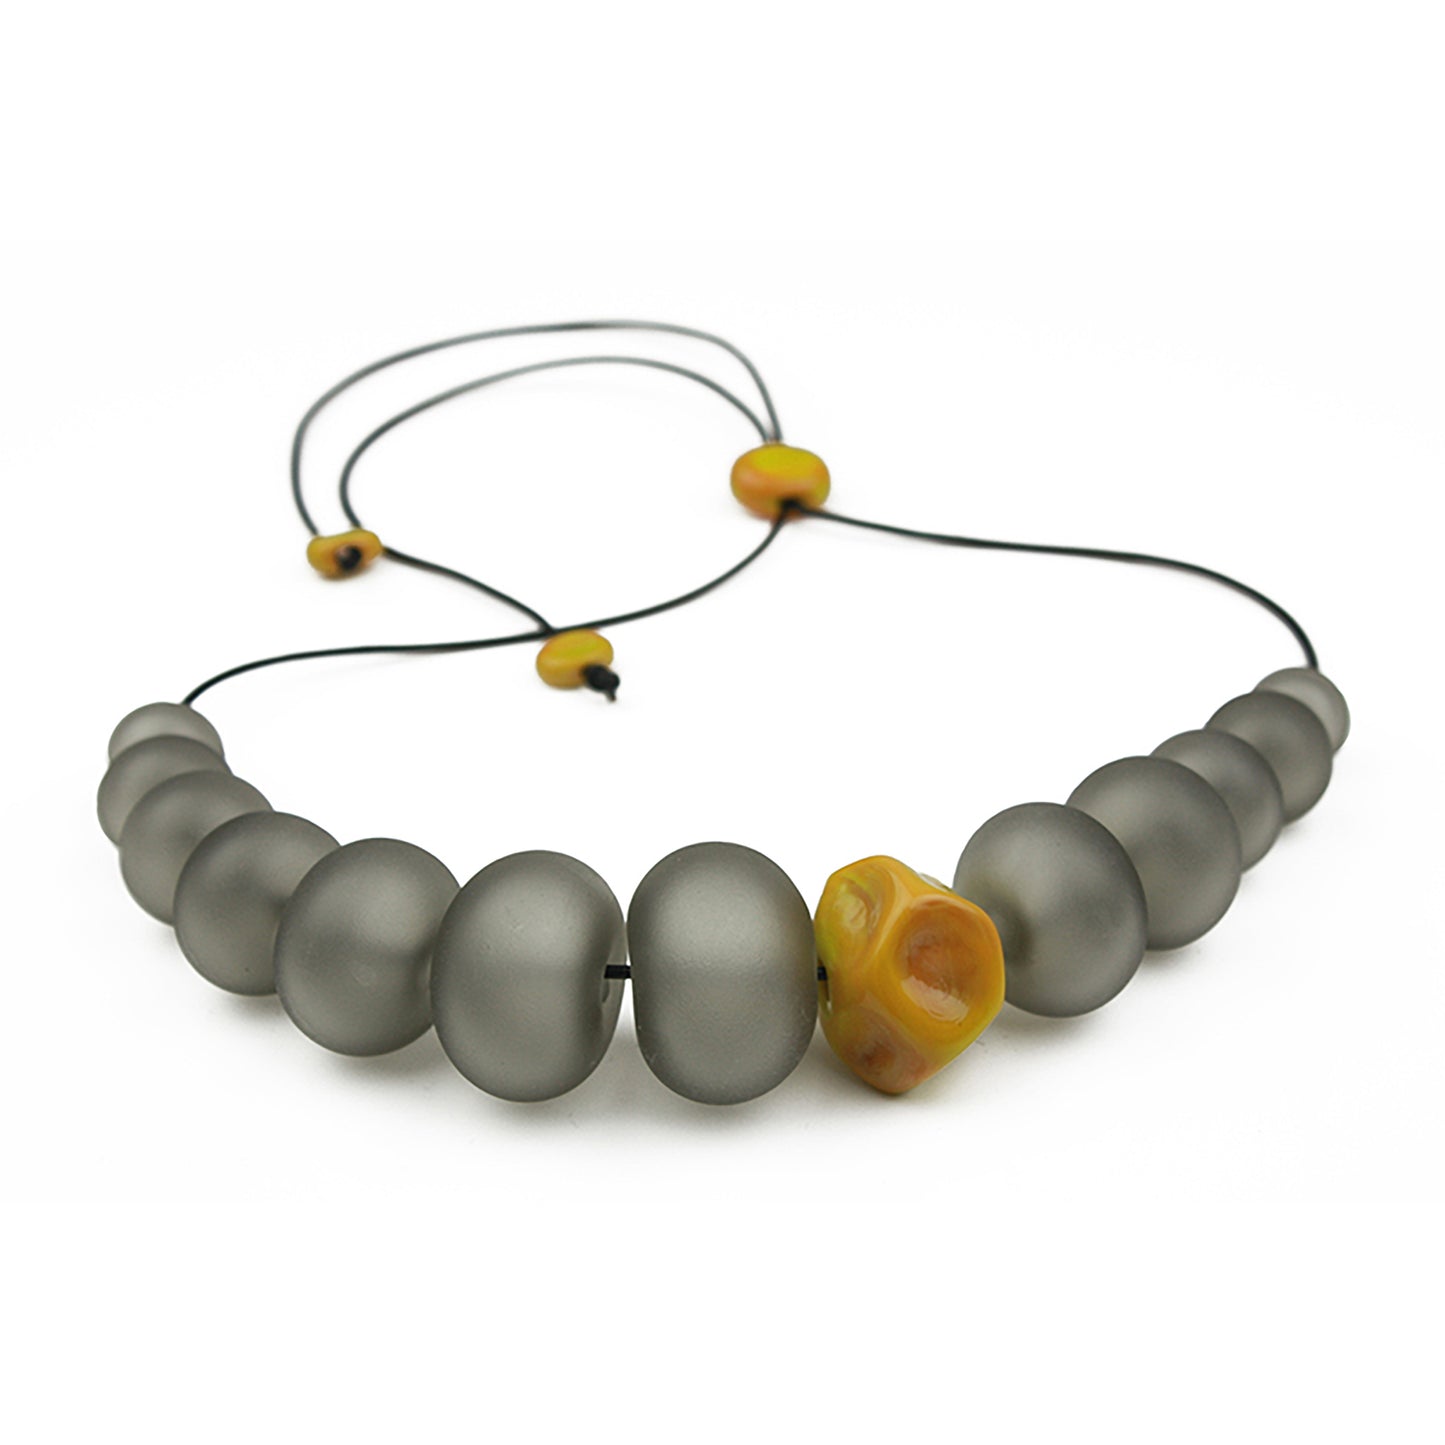 Bubble and nugget necklace - grey and ochre yellow